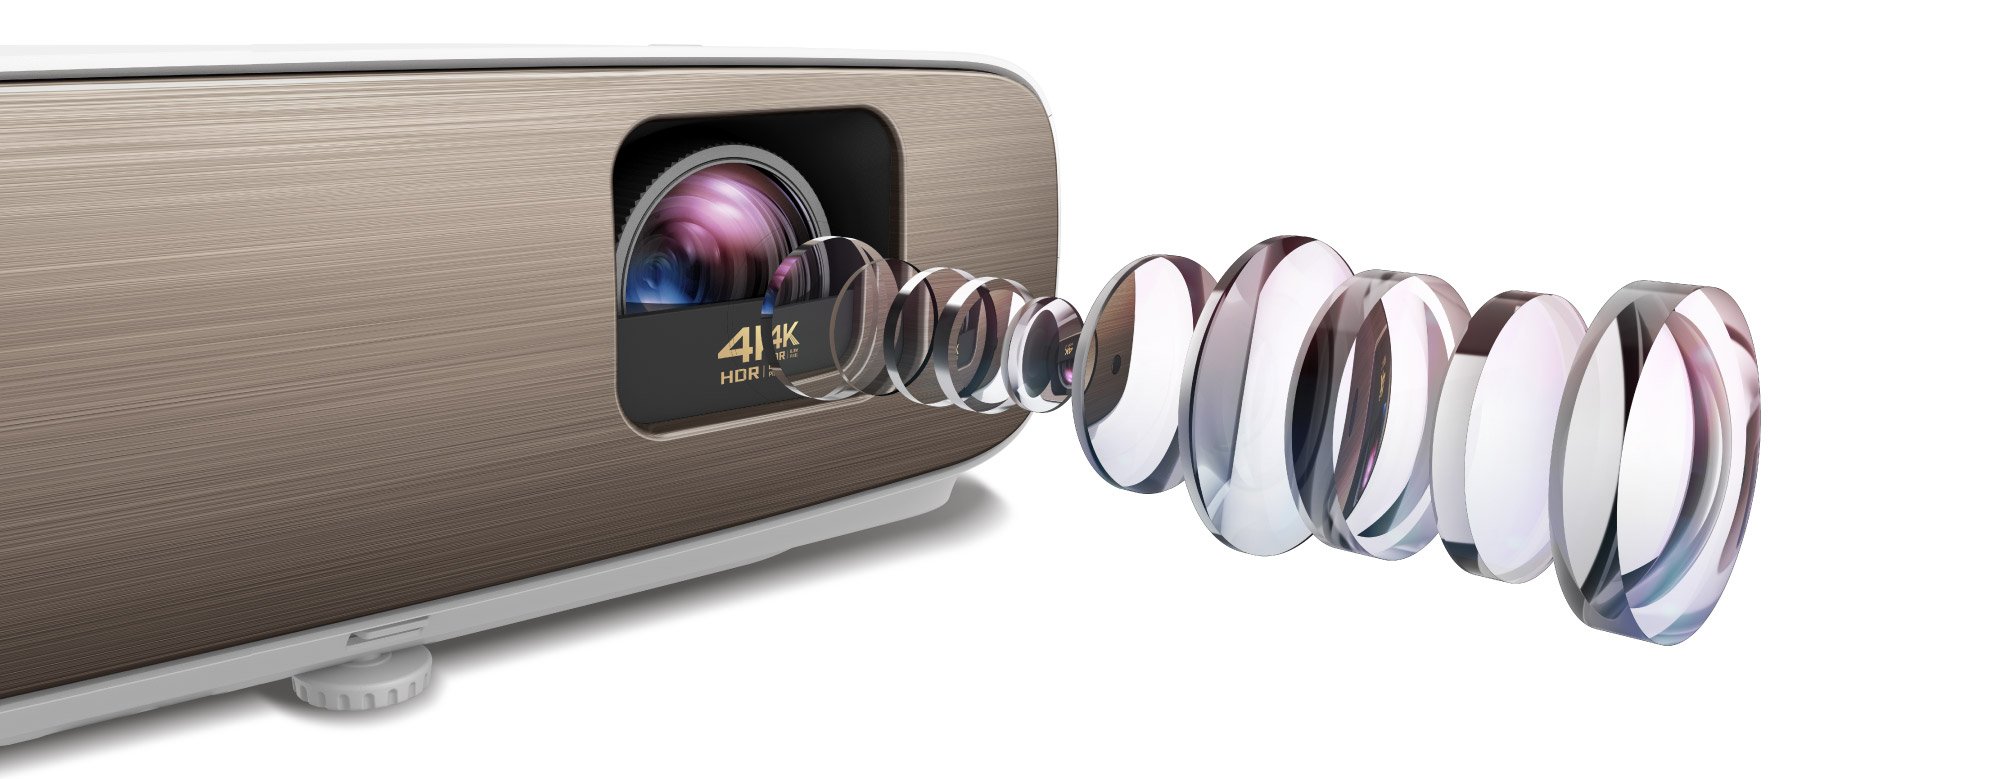 BenQ's 4K Home Projector Powered by Android TV w2700i is equipped with super-high resolution 10-element lens array